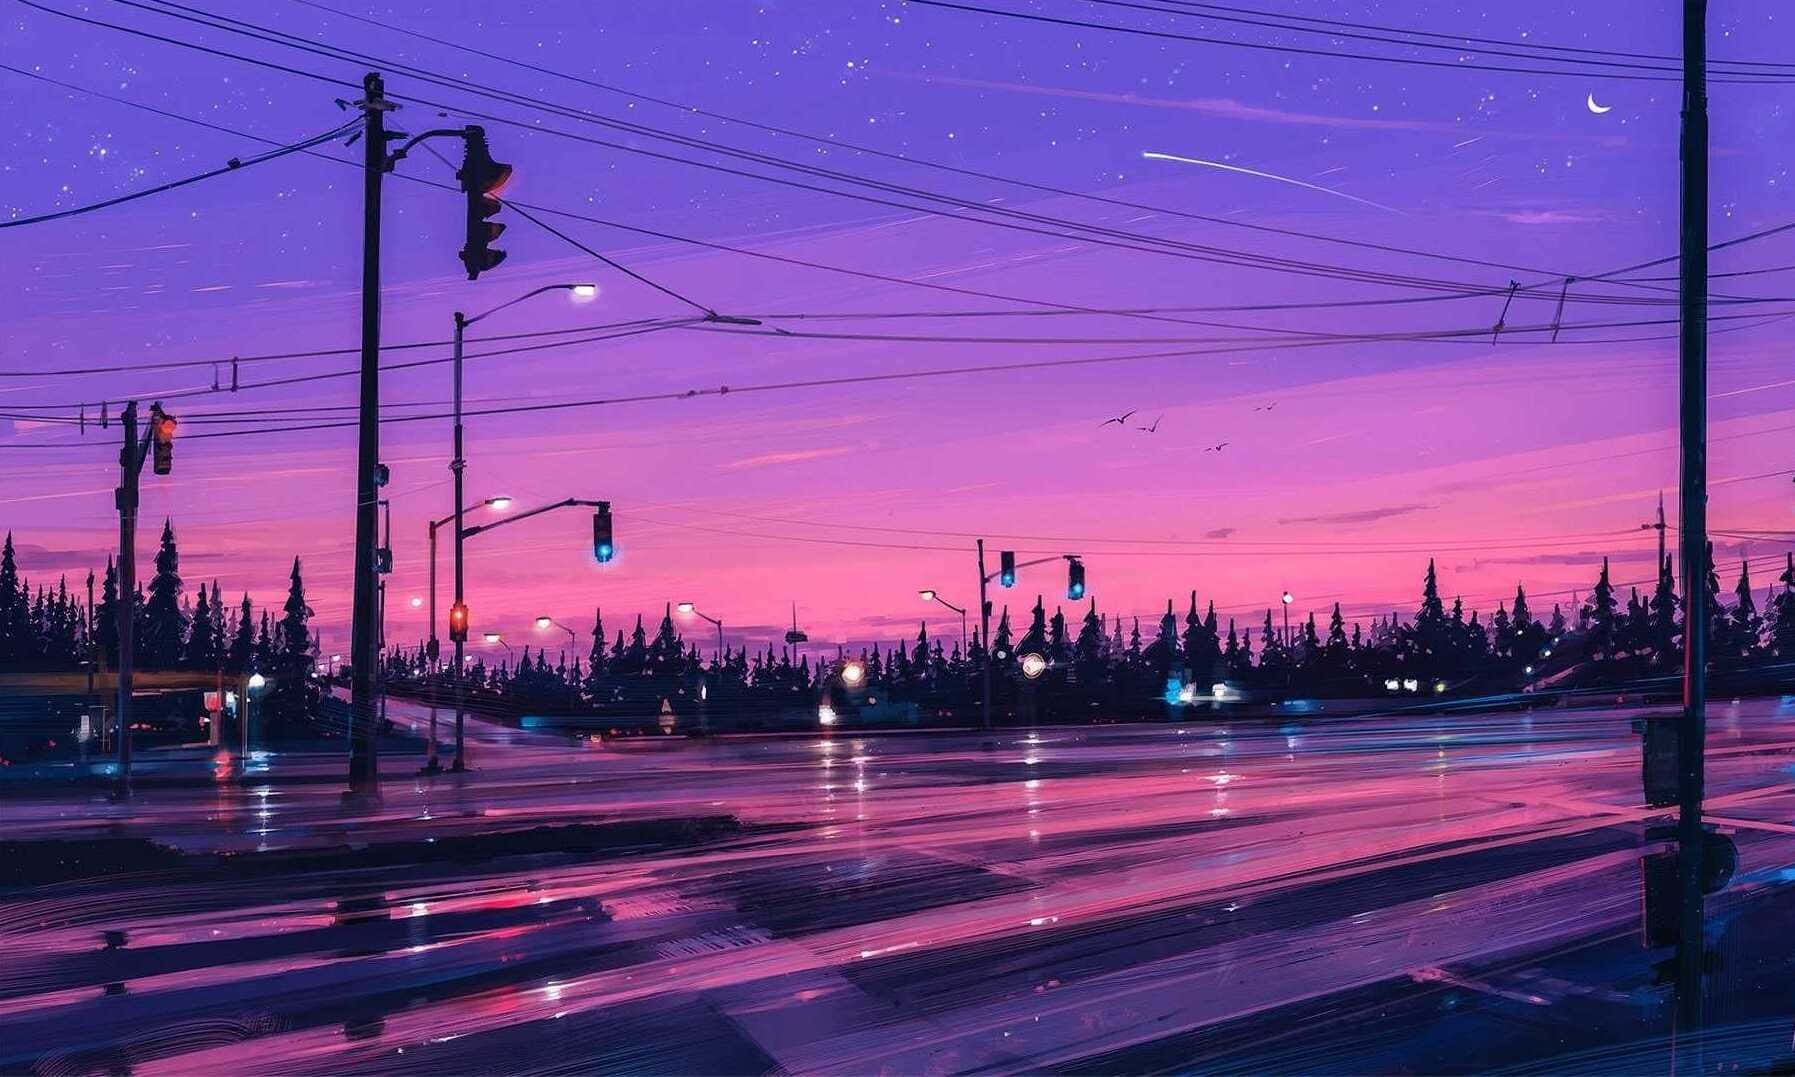 A Painting Of A Street With A Purple Sky